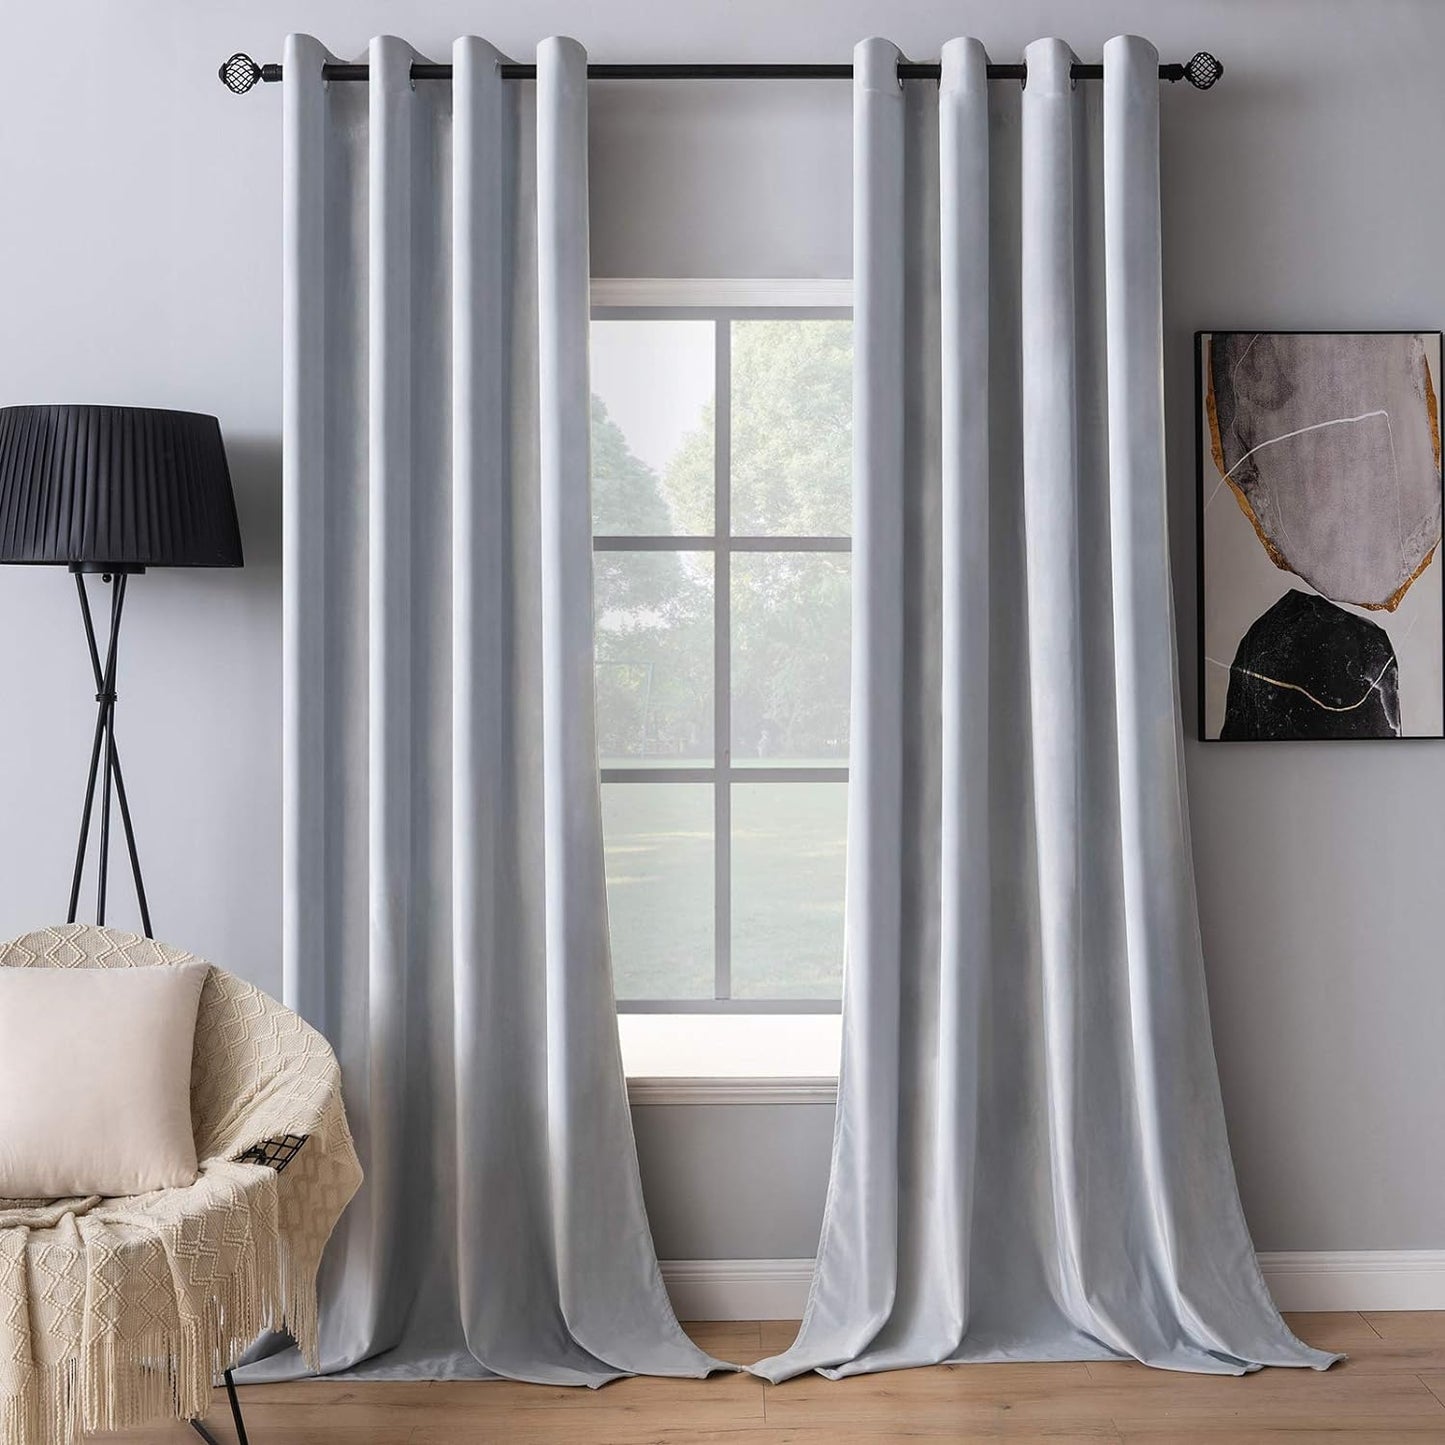 MIULEE Velvet Curtains Olive Green Elegant Grommet Curtains Thermal Insulated Soundproof Room Darkening Curtains/Drapes for Classical Living Room Bedroom Decor 52 X 84 Inch Set of 2  MIULEE Greyish White W52 X L96 